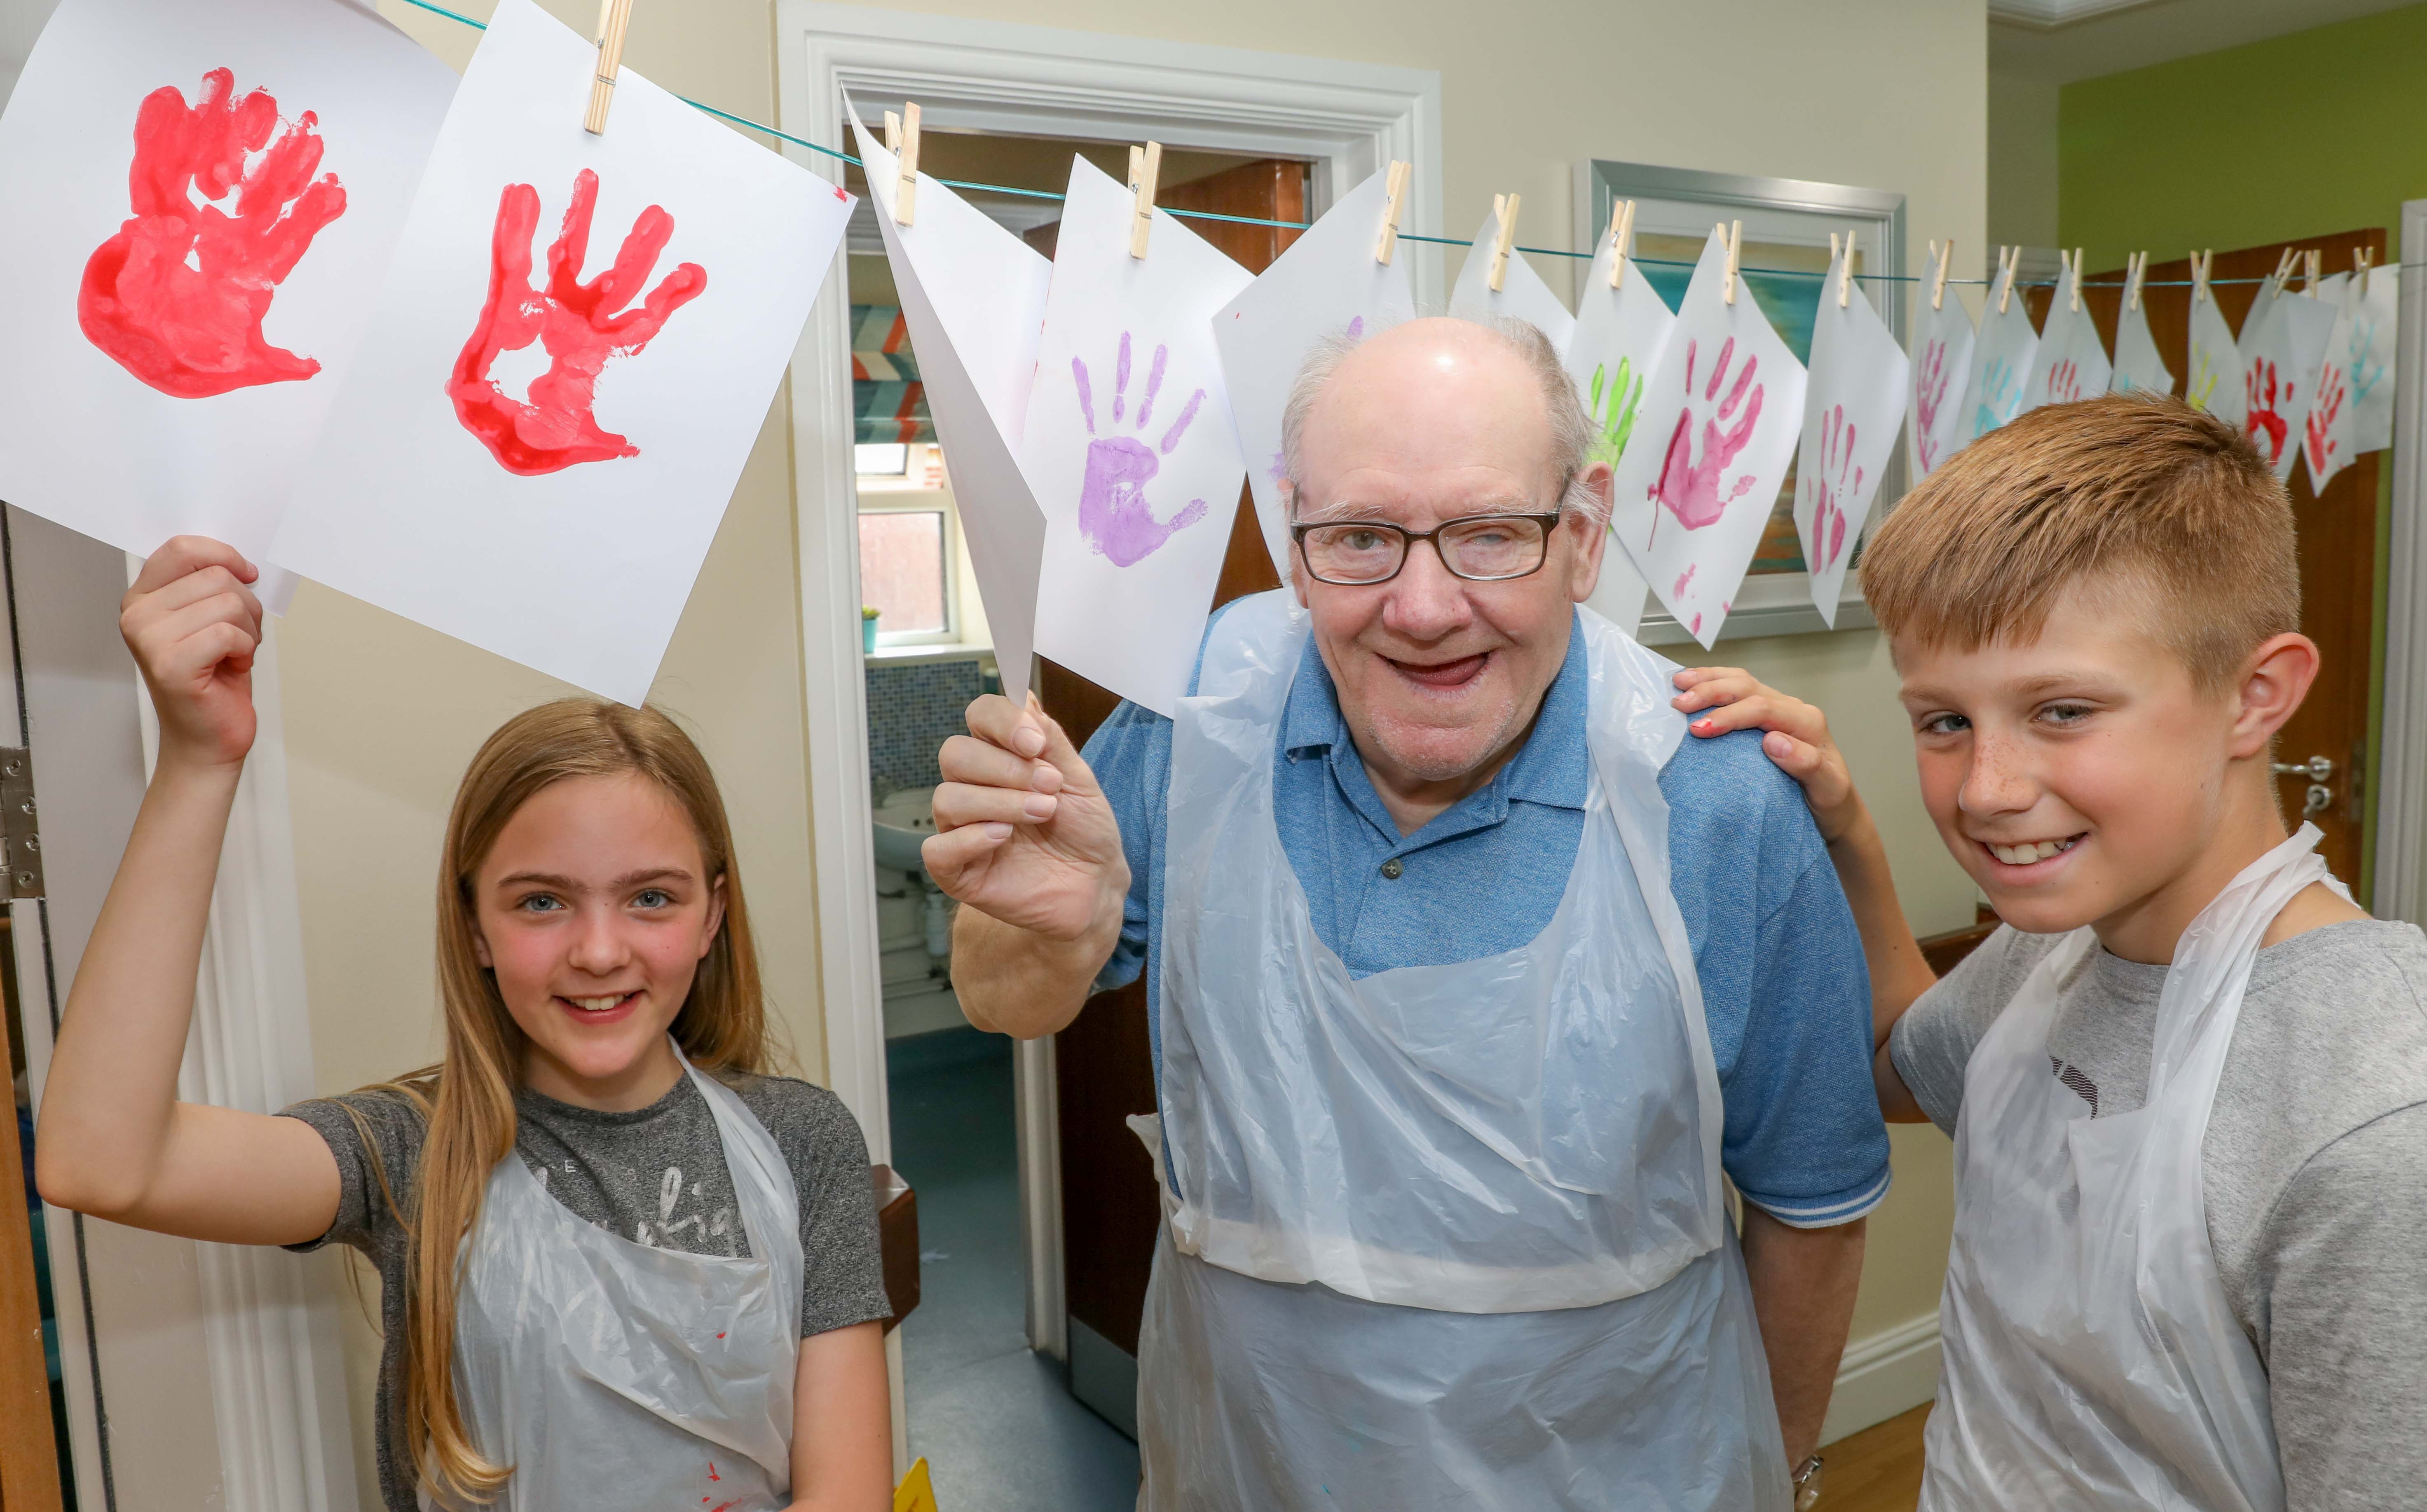 Artistic youngsters join forces with care home residents to brighten up safety centre